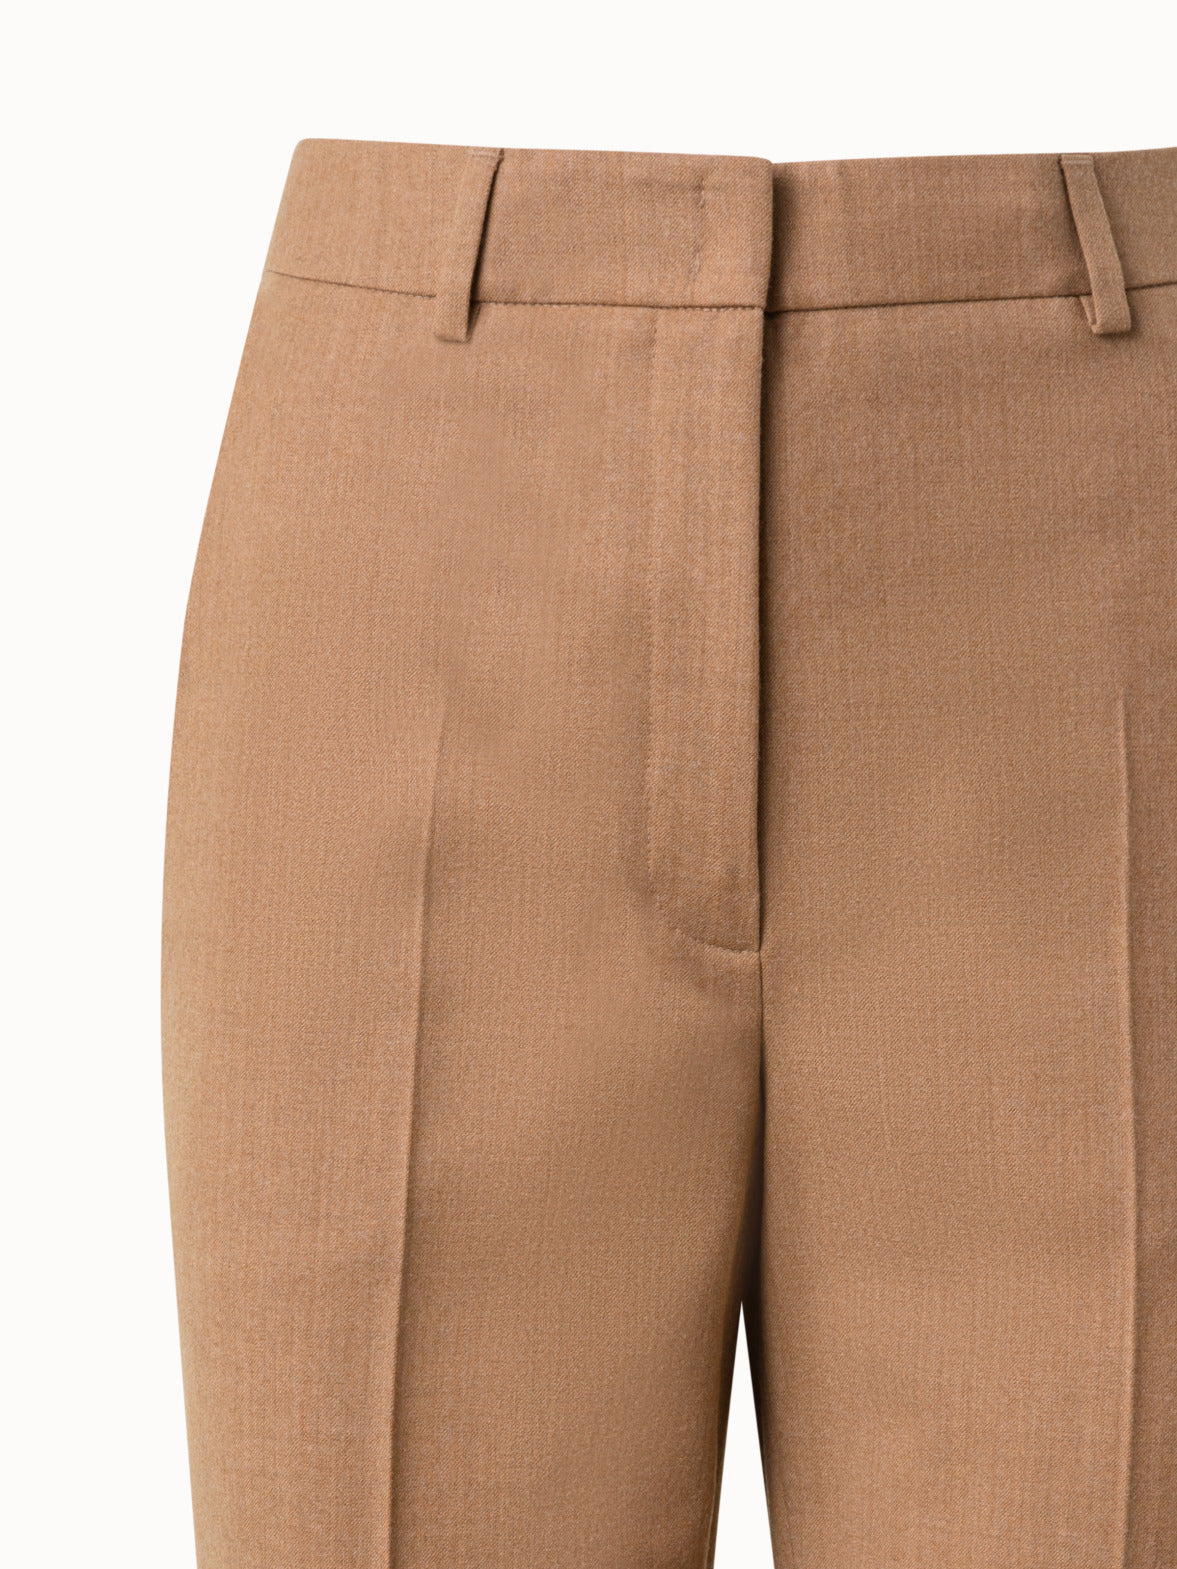 Camel Wide Leg Tailored Trousers | New Look